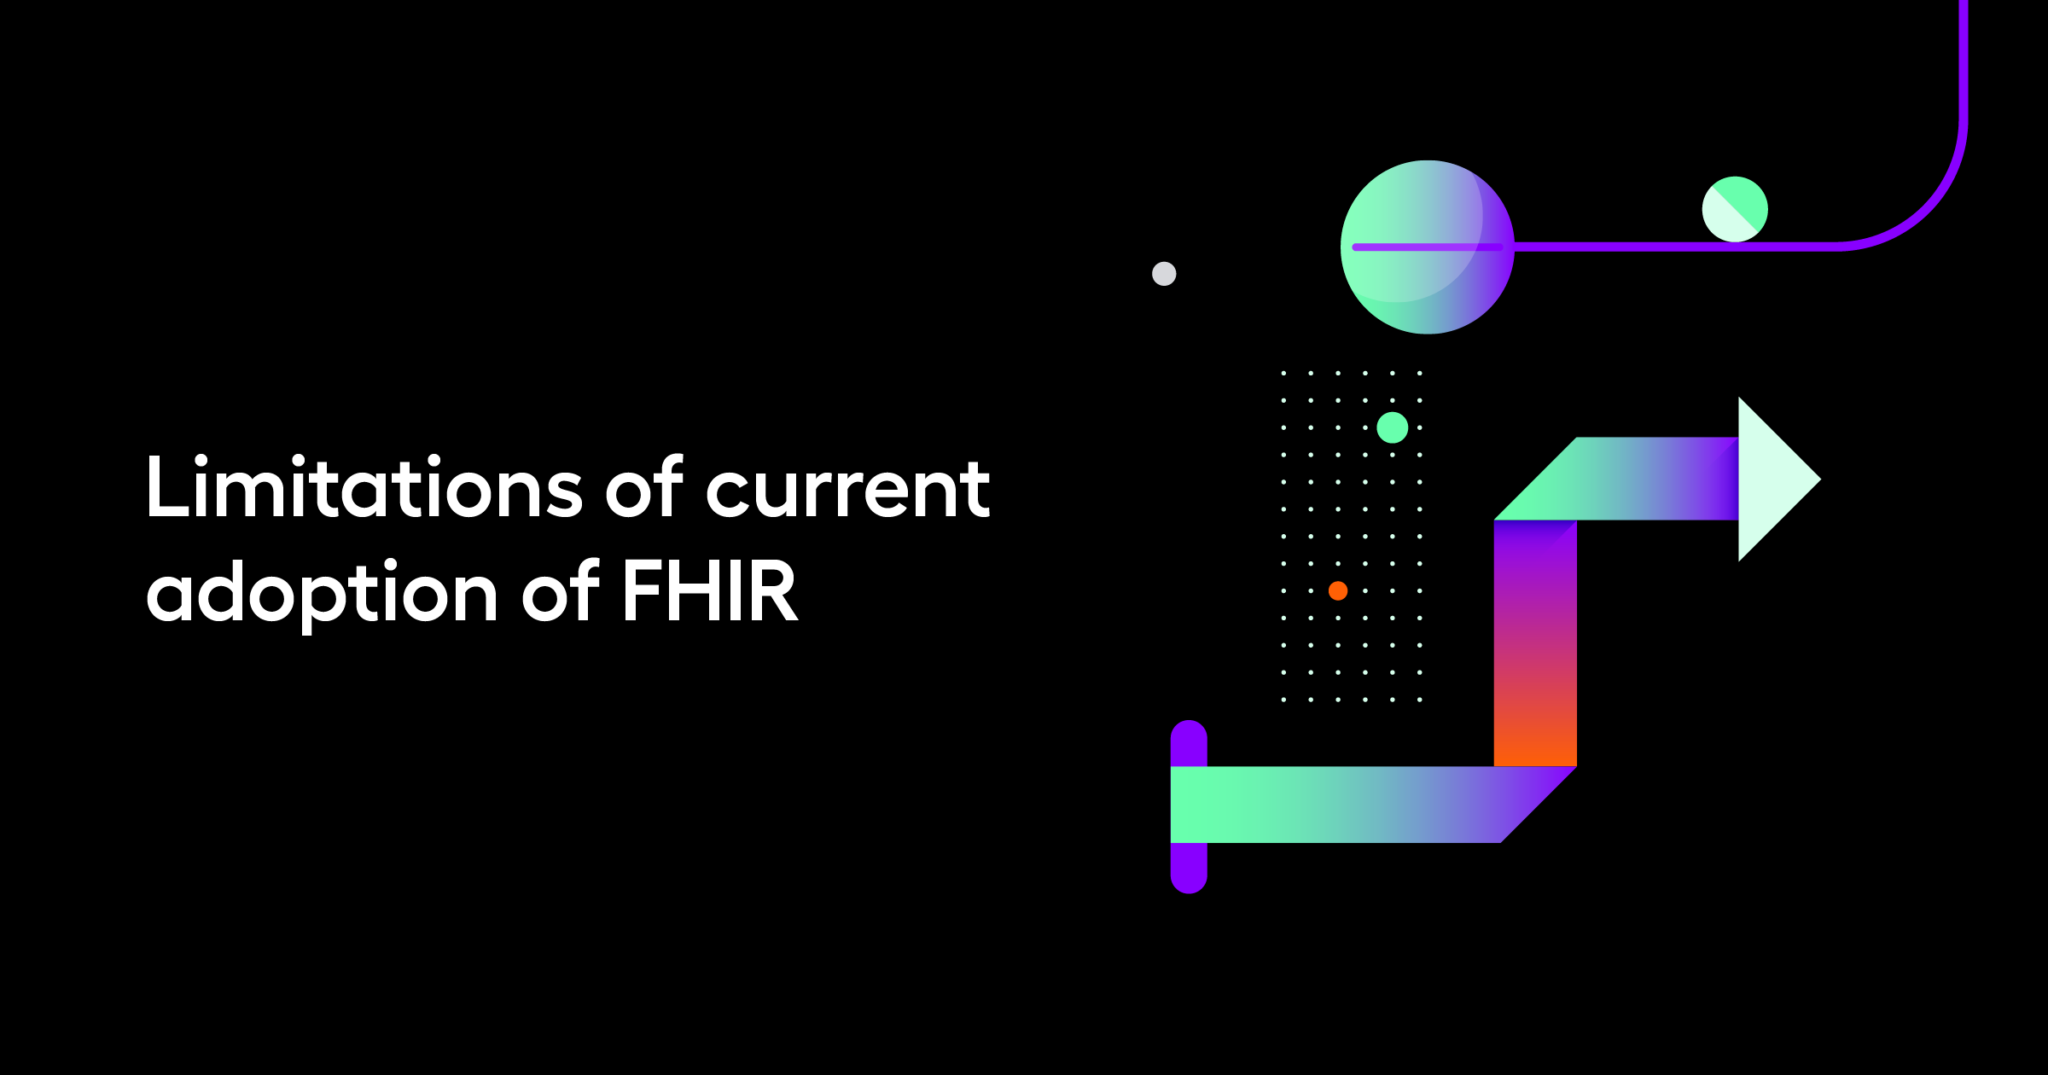 Limitations of current adoption of FHIR